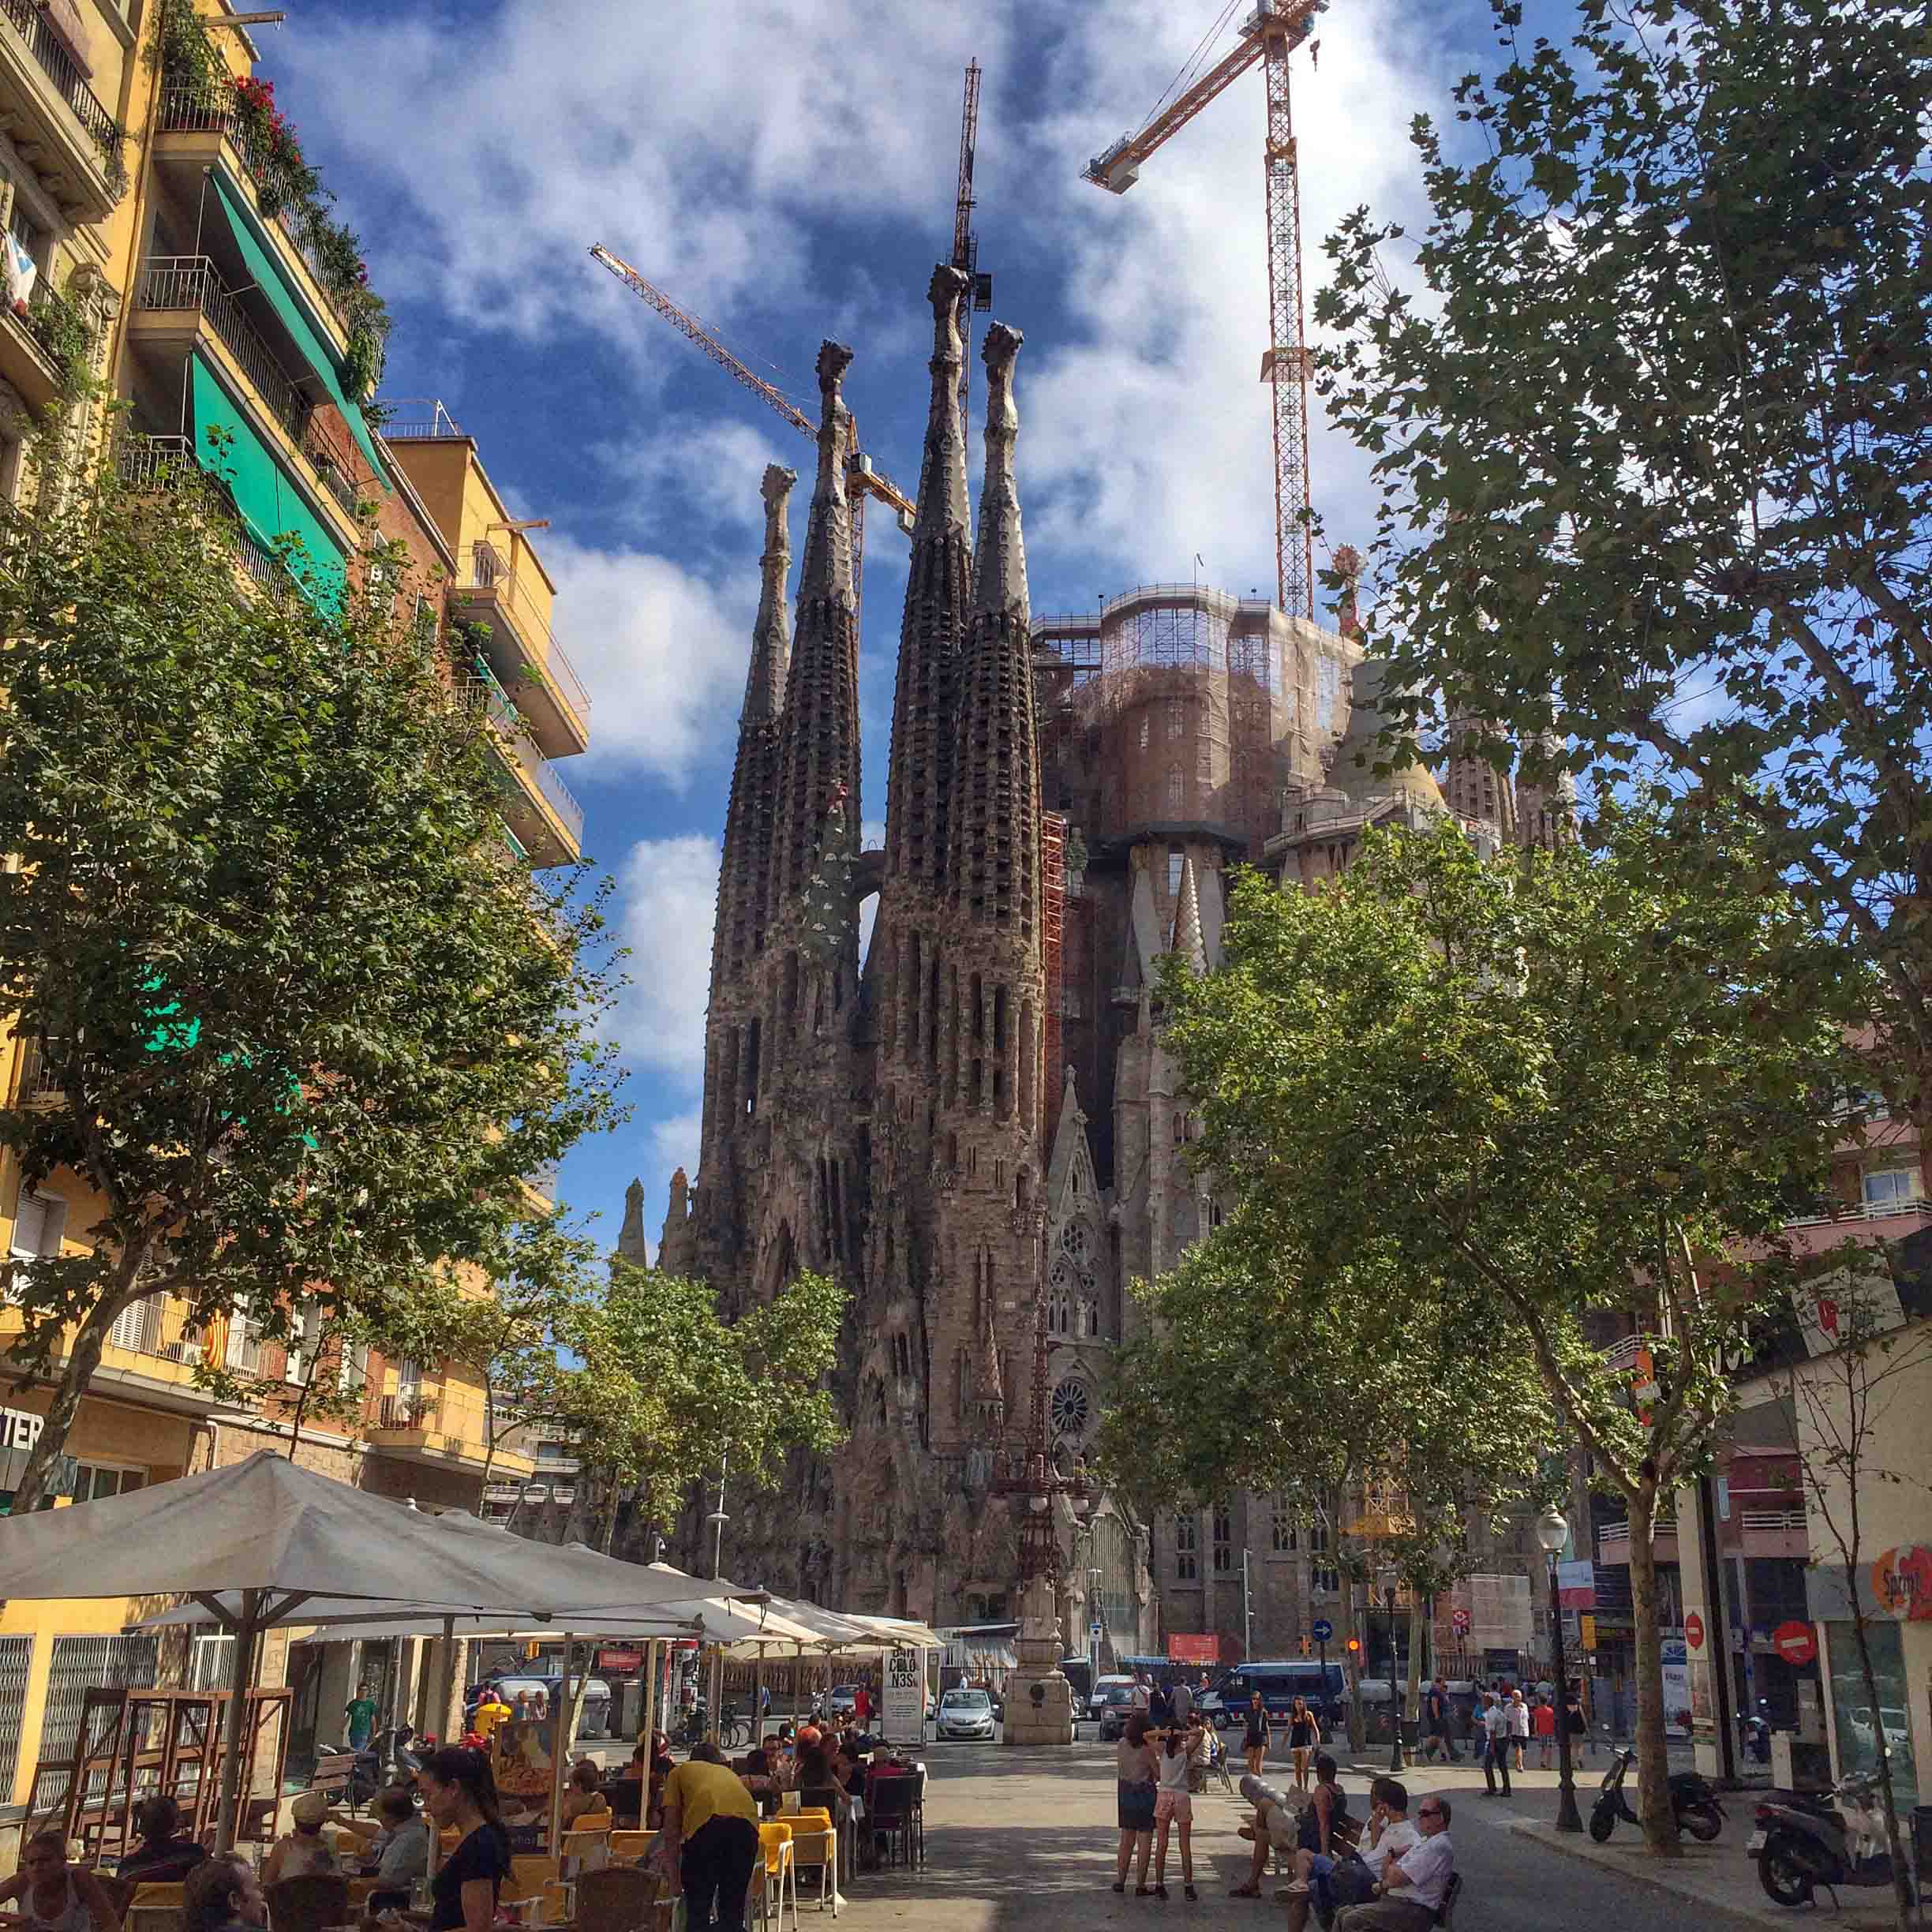 Barcelona, Spain is a Seriously Cool City